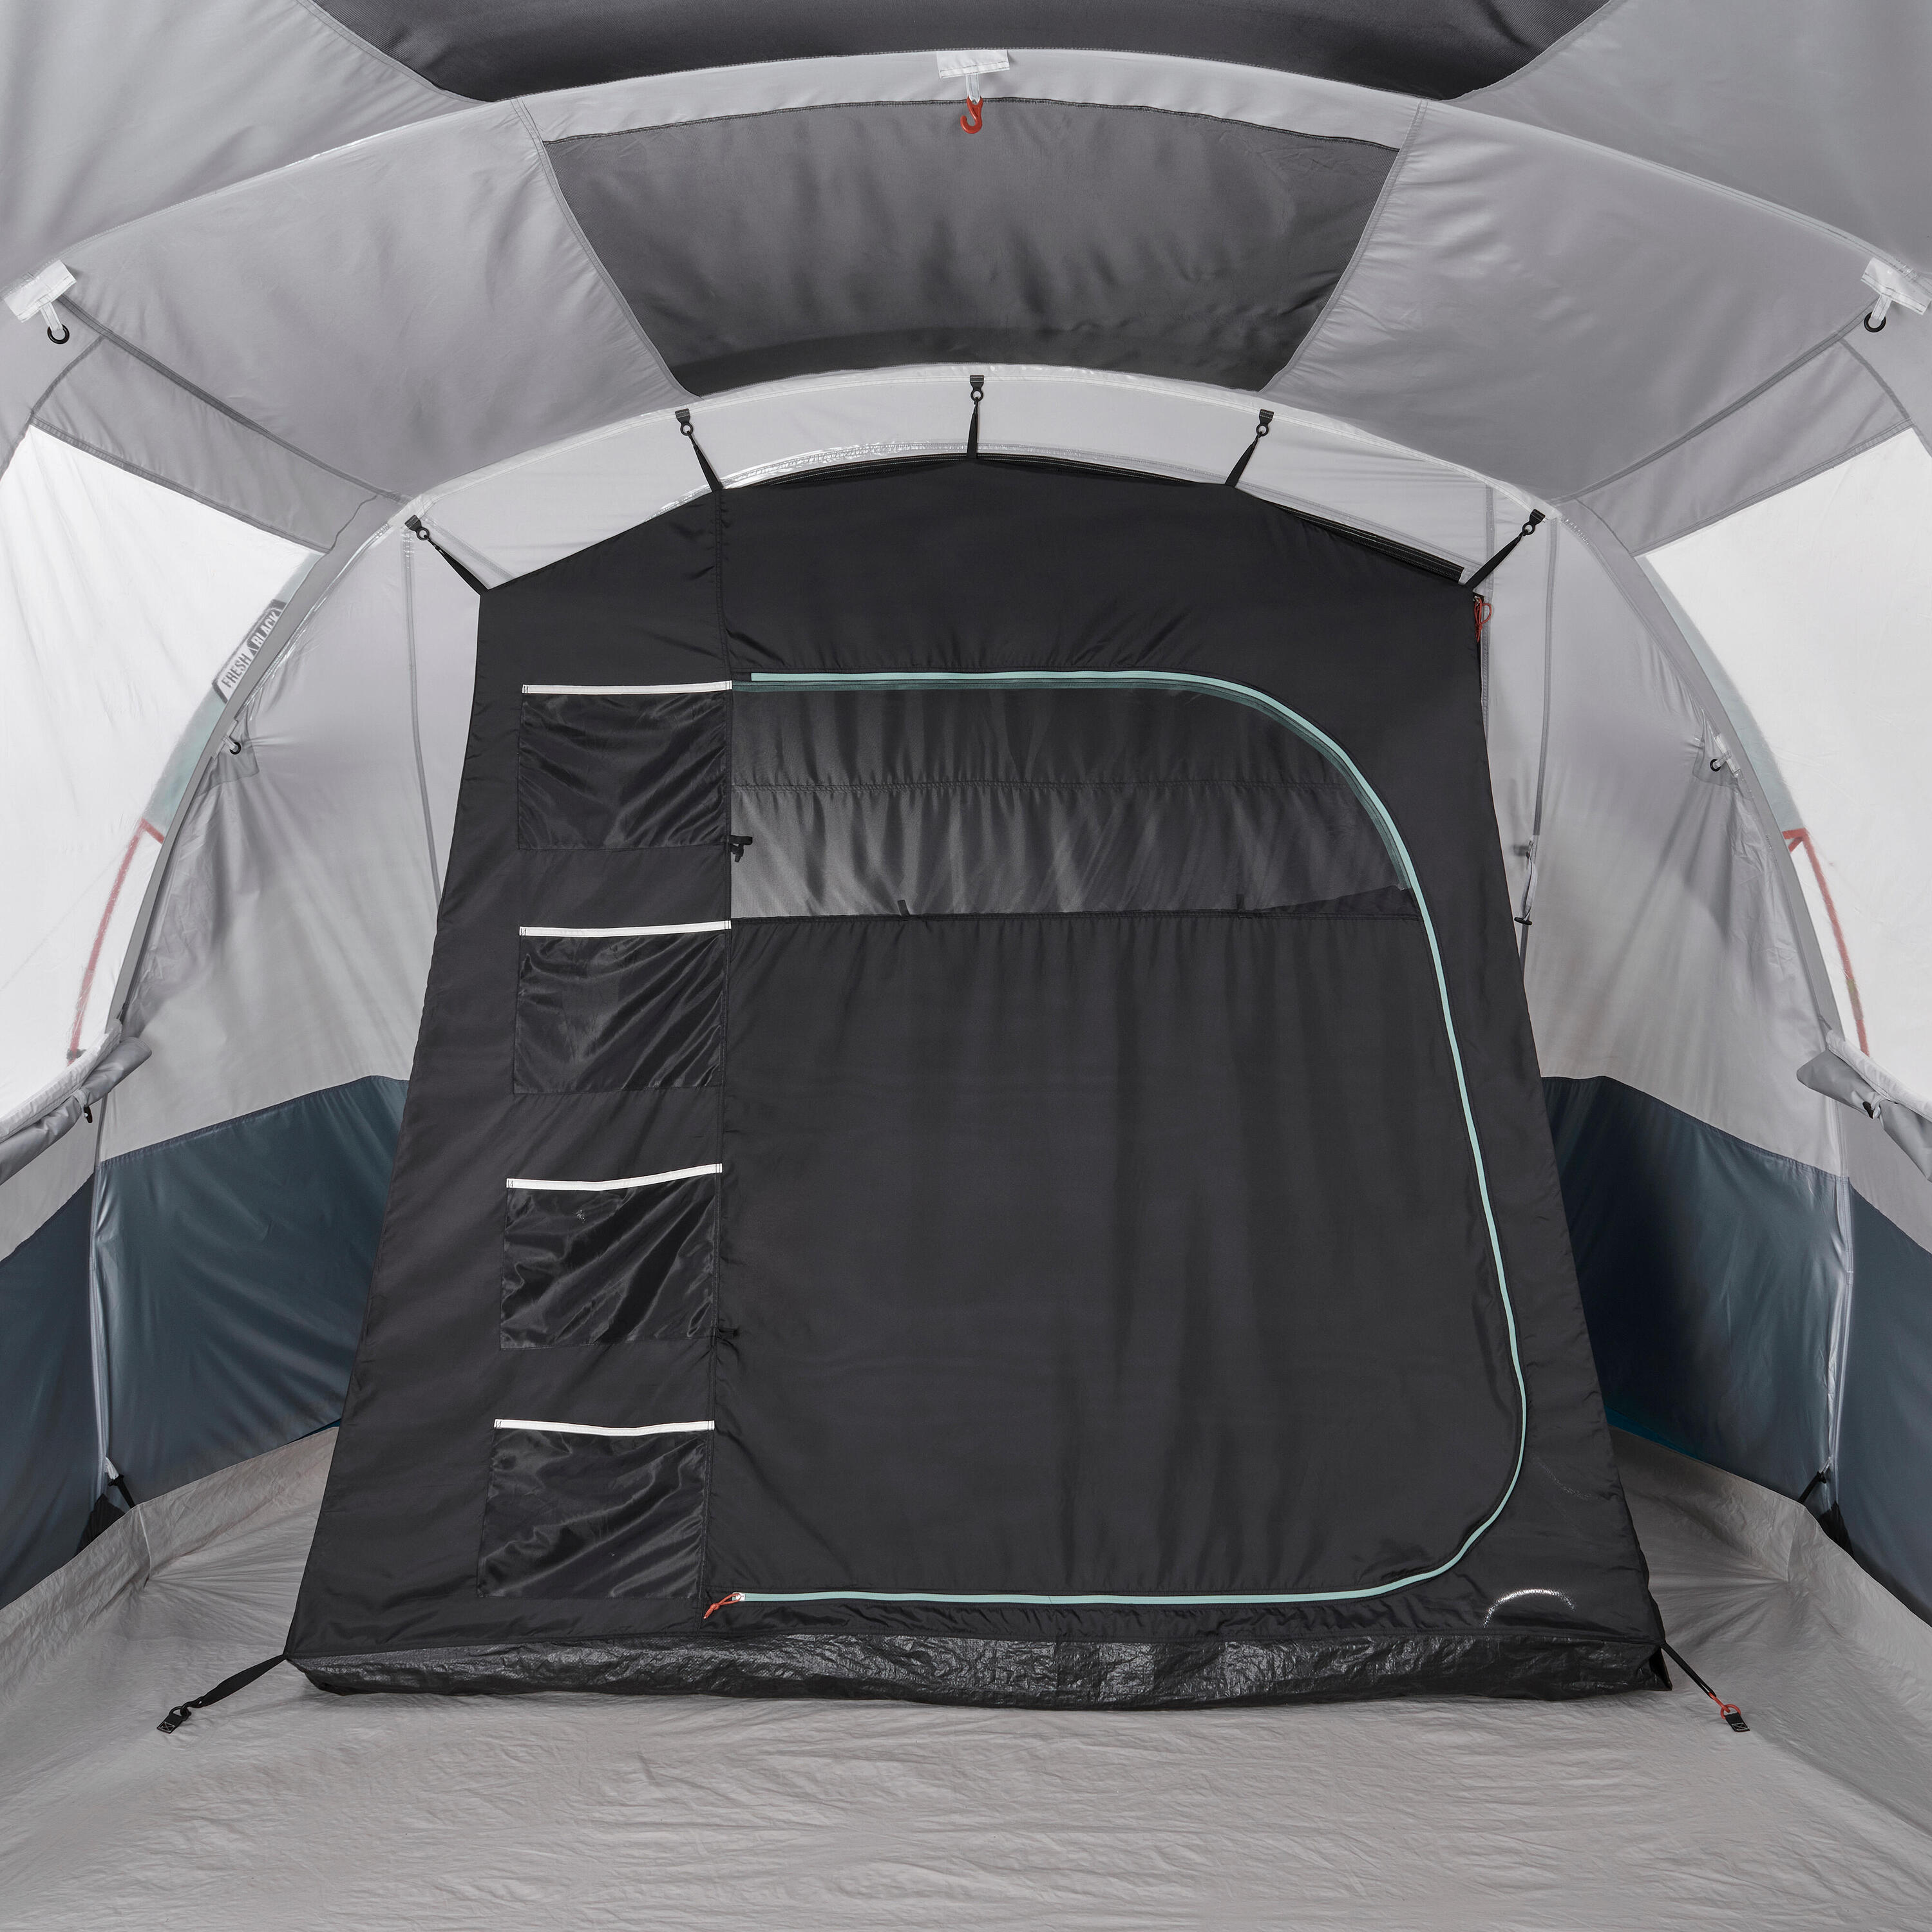 Camping tent with poles - Arpenaz 6.3 F&B - 6 Person - 3 Bedrooms 31/35